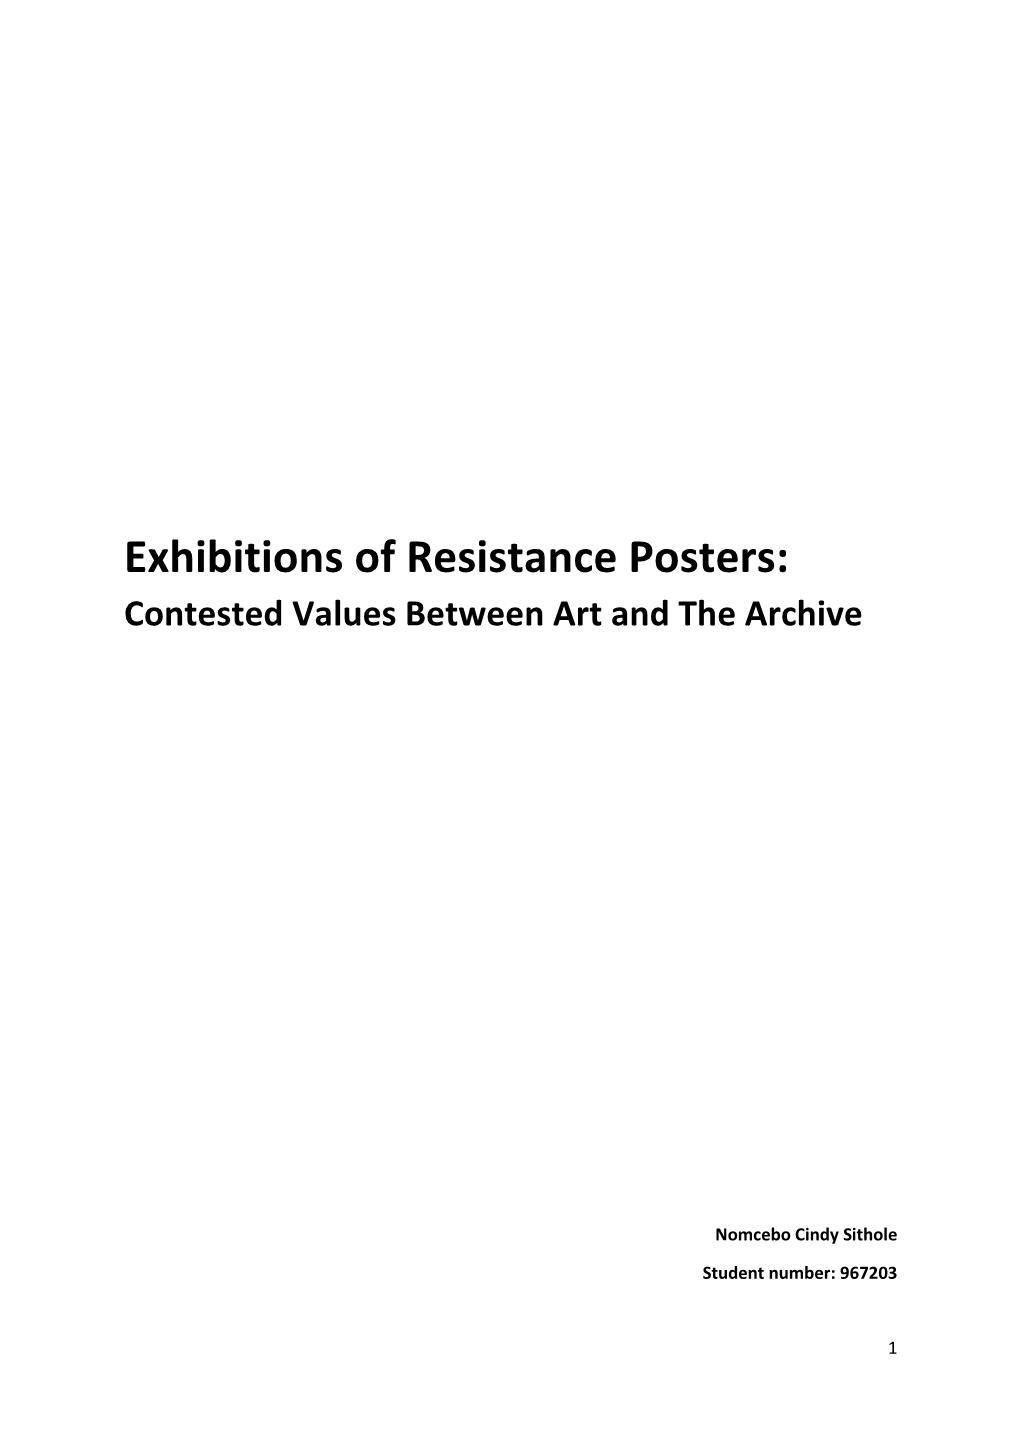 Exhibitions of Resistance Posters: Contested Values Between Art and the Archive